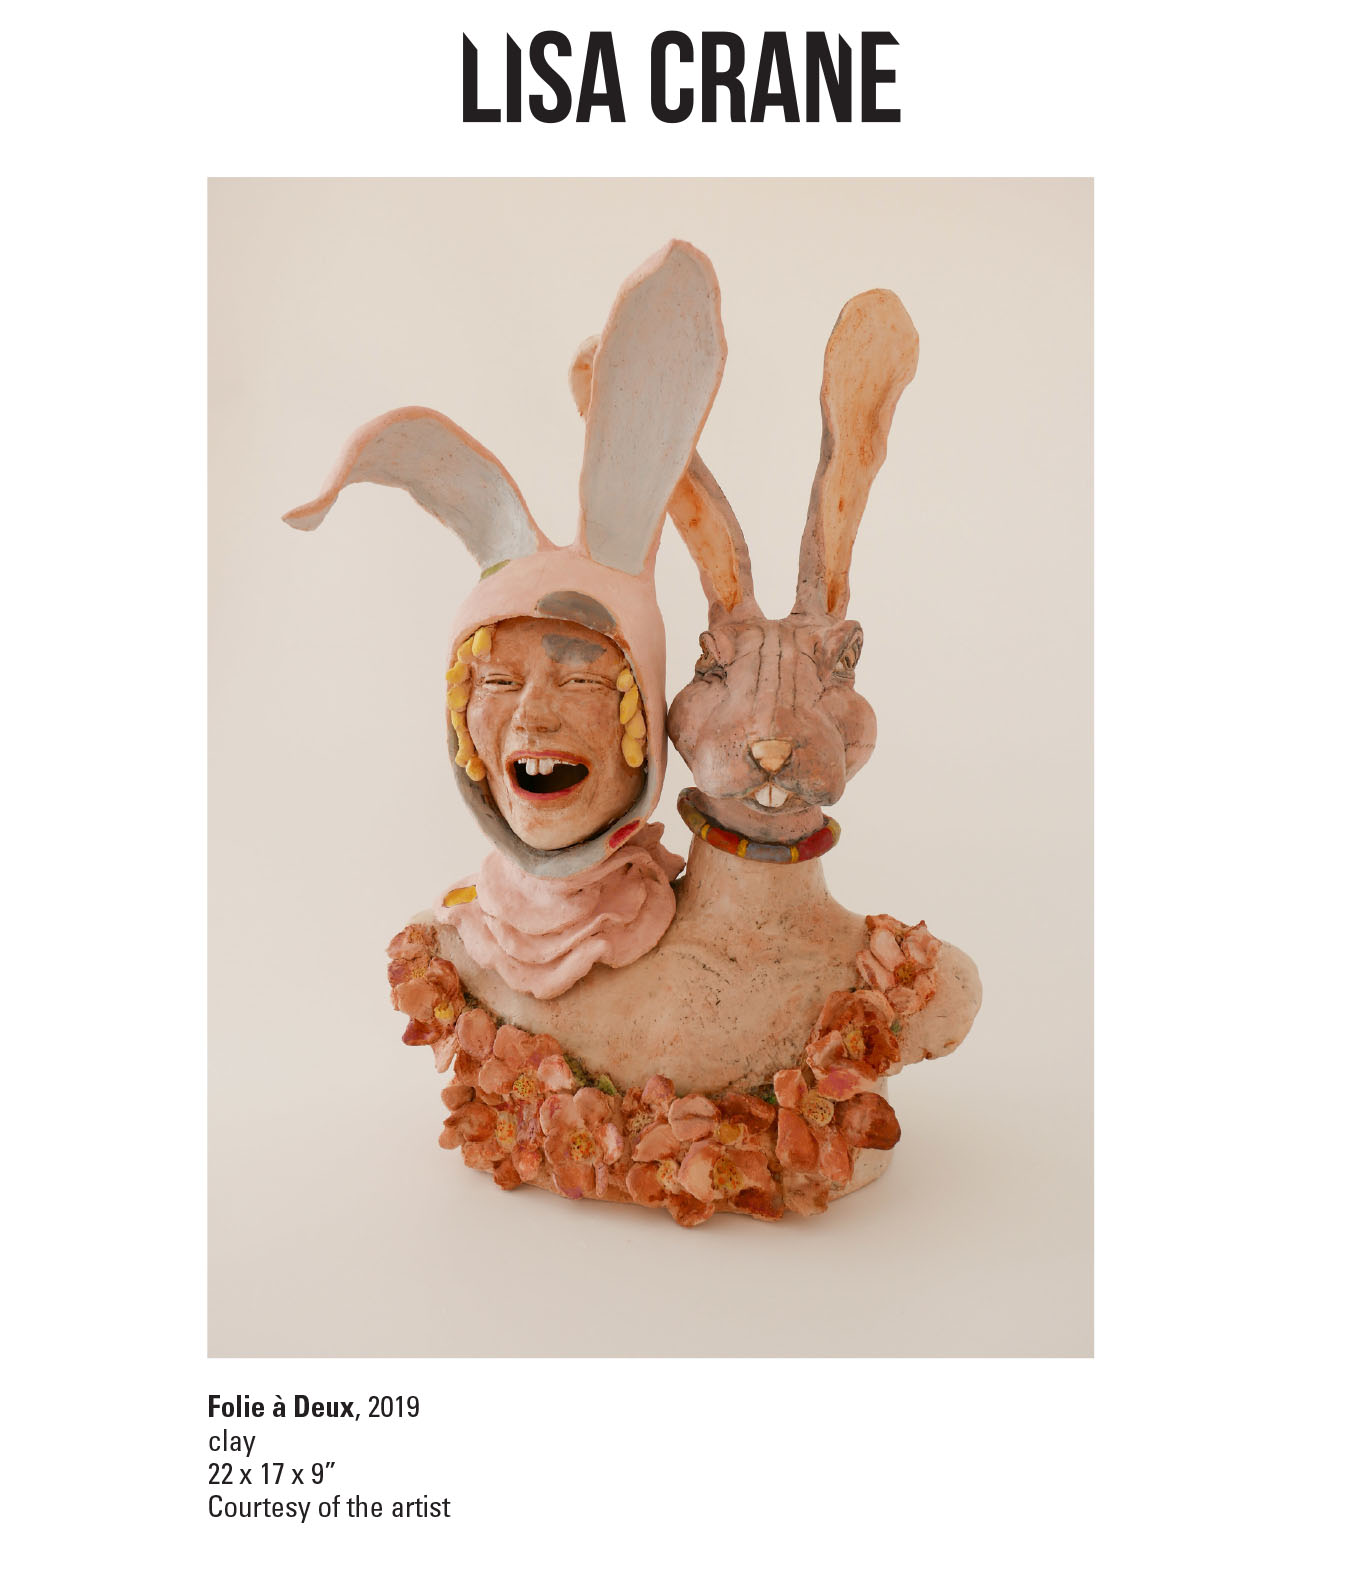 Lisa Crane, Folie a Deux, 2019. Clay. 22 x 17 x 9” Courtesy of the artist. A sculpture of the head of a woman and rabitt wearing a wreath of flowers